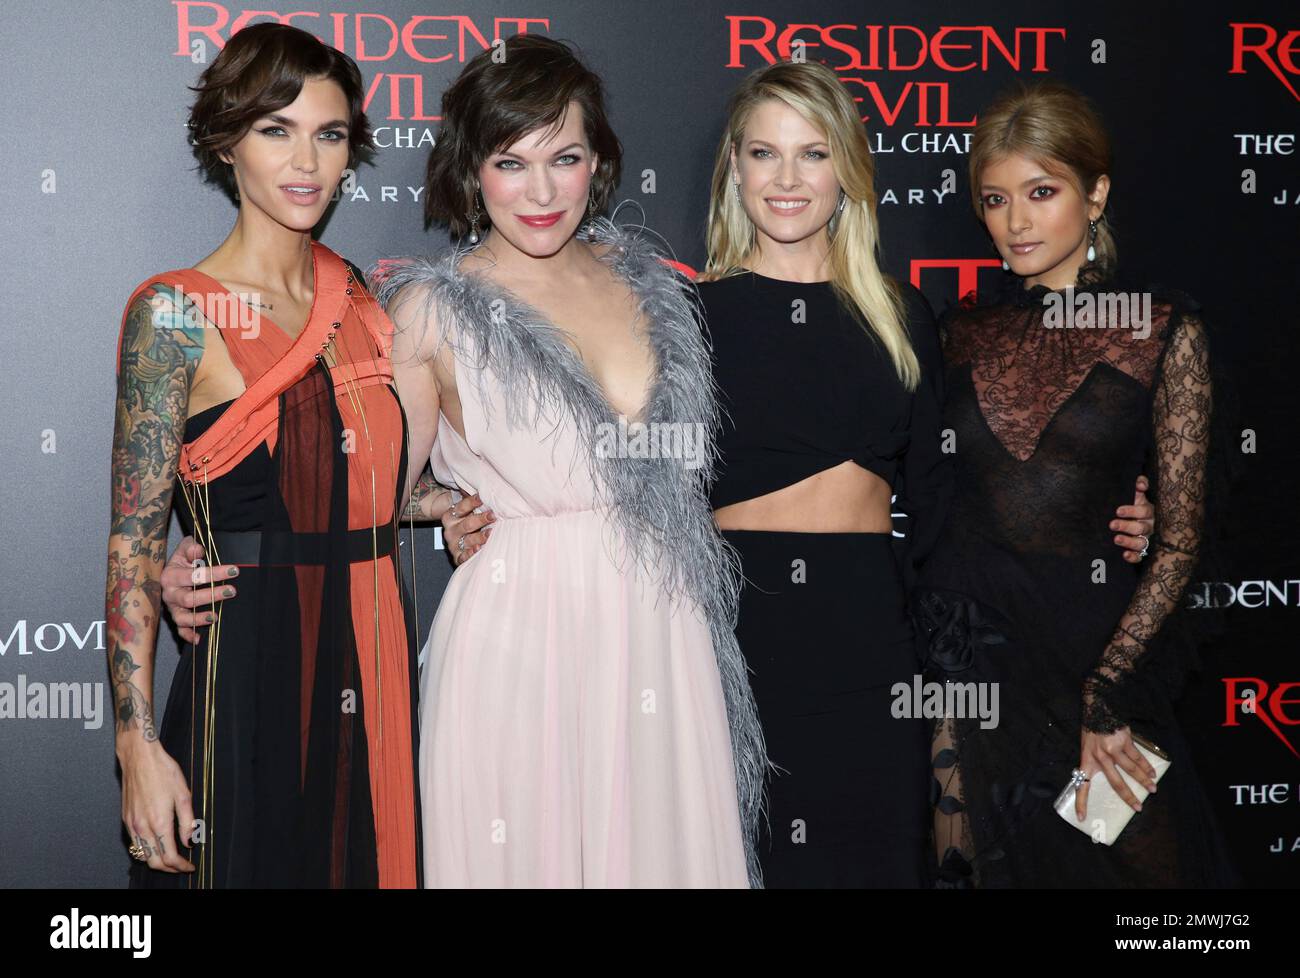 L-R) Ruby Rose, Milla Jovovich, Ali Larter and Rola arrives at the